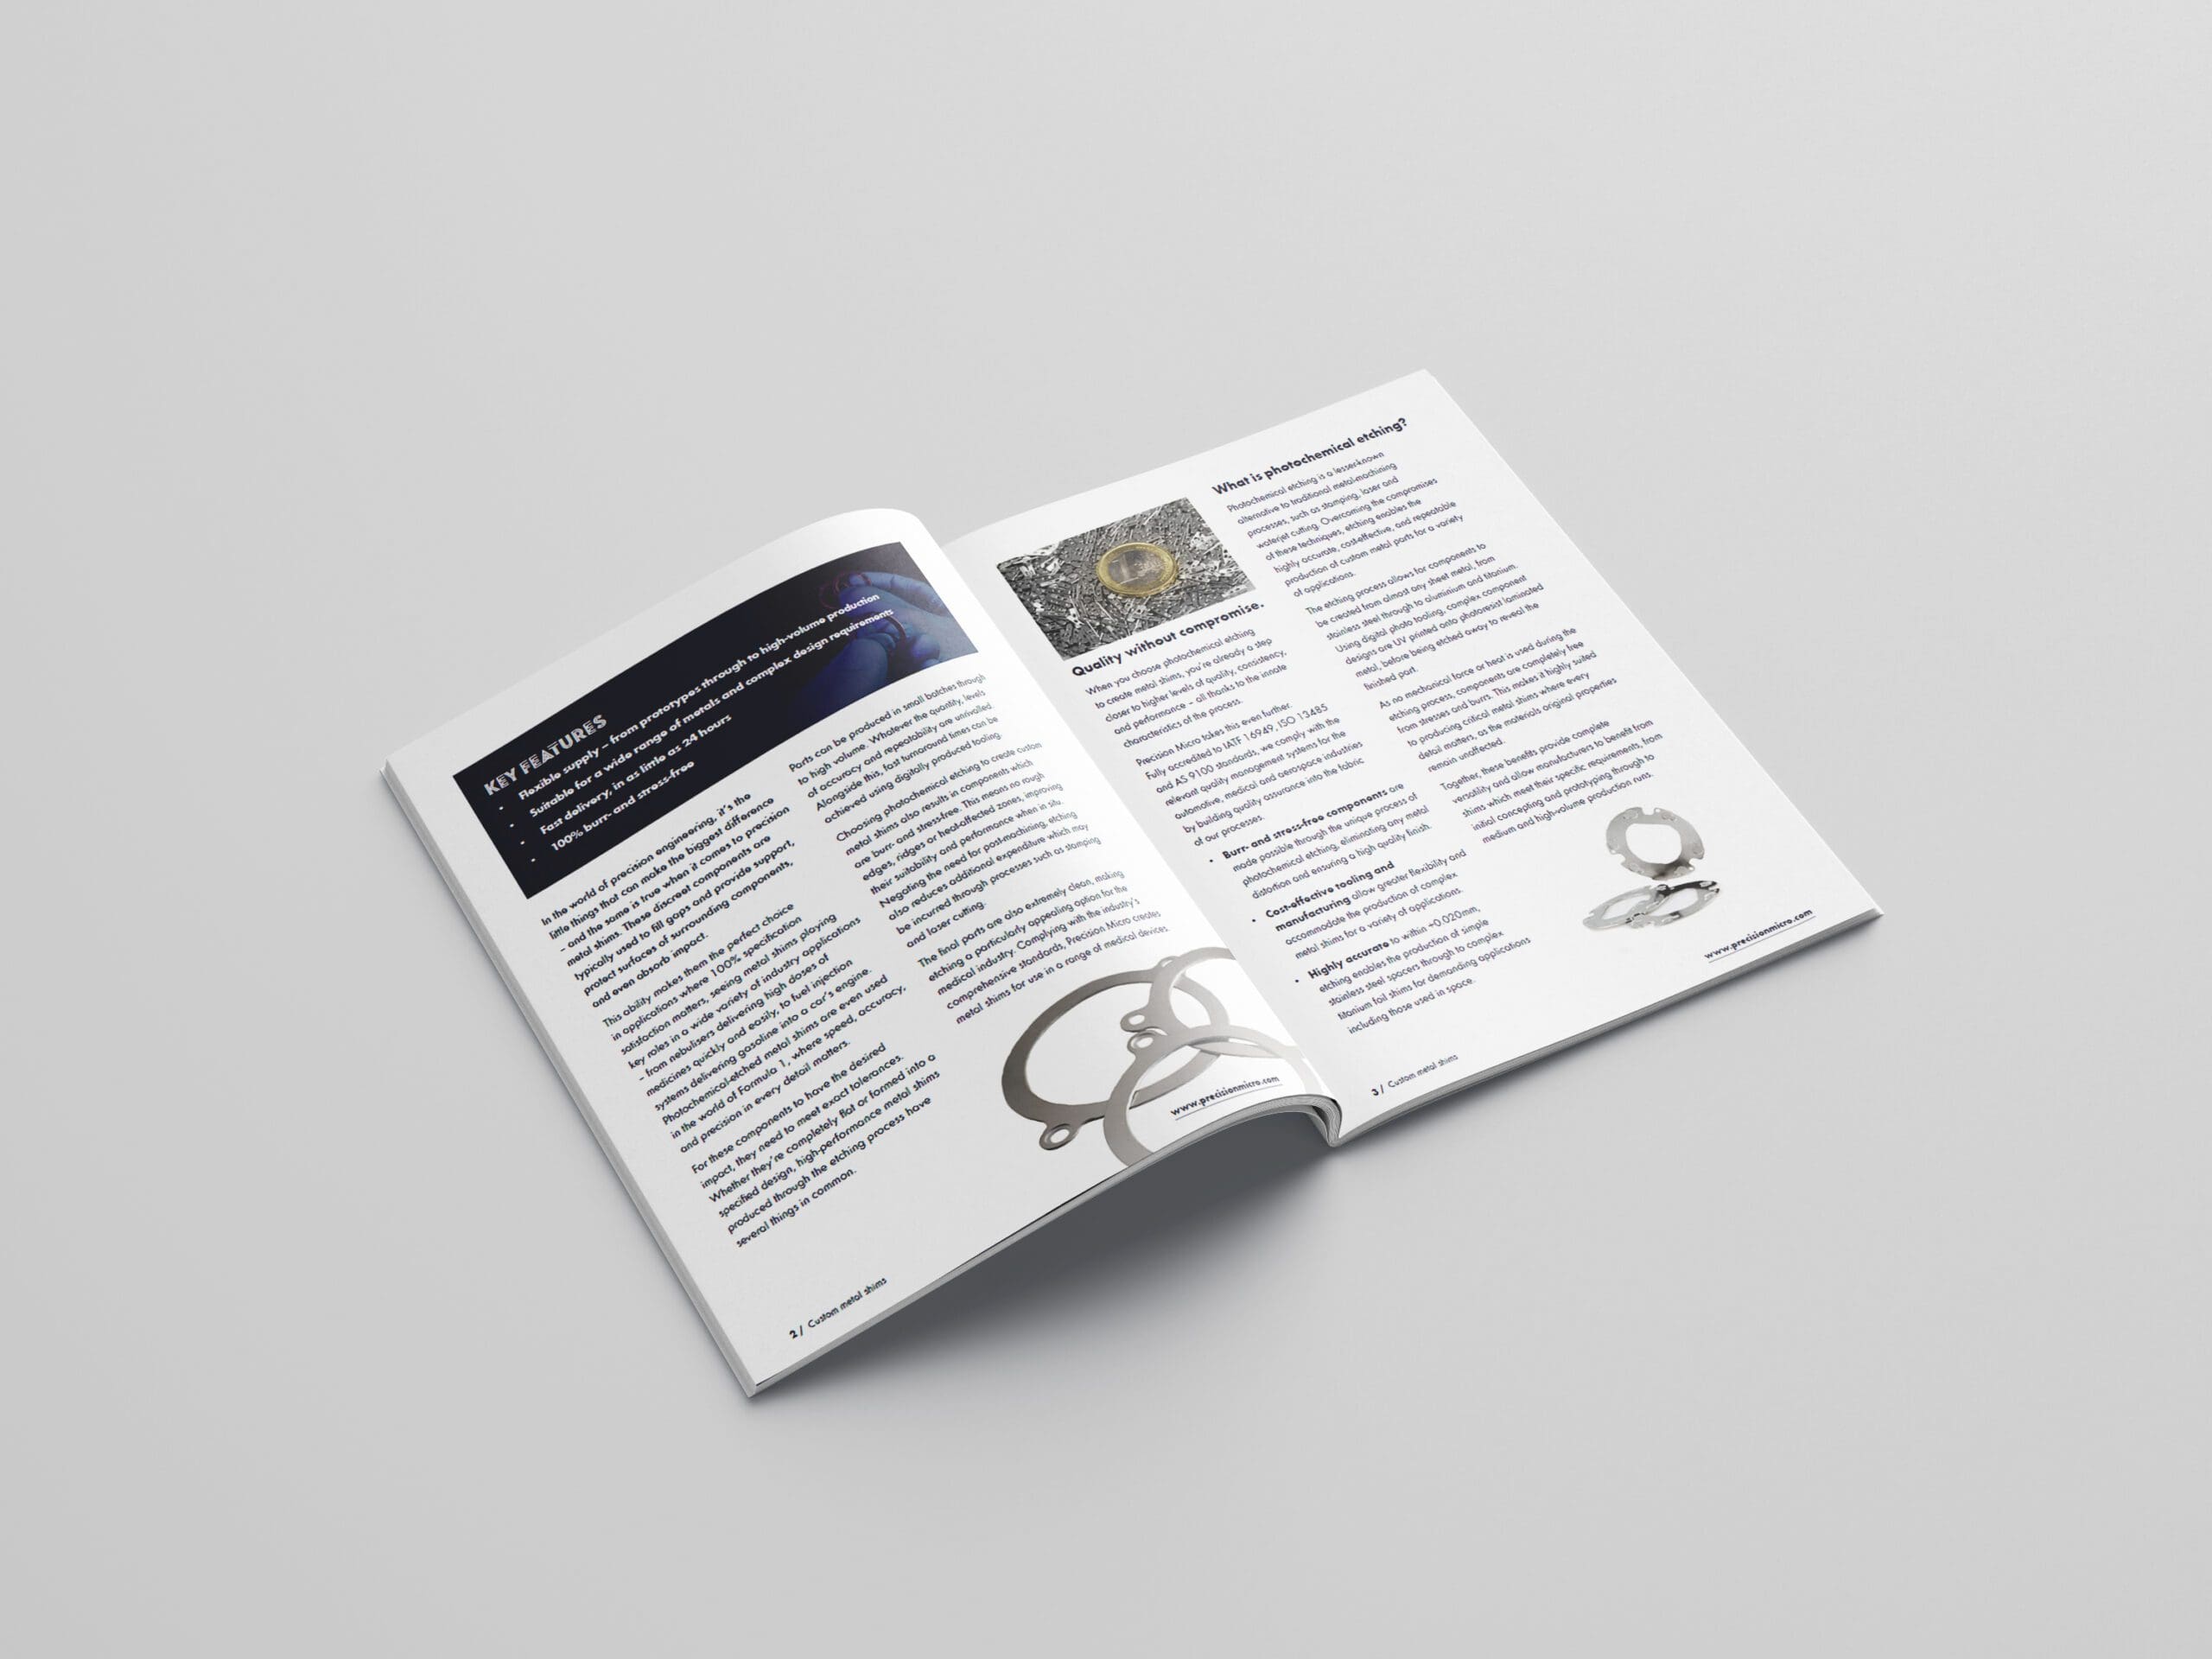 Metal shims application note inside pages